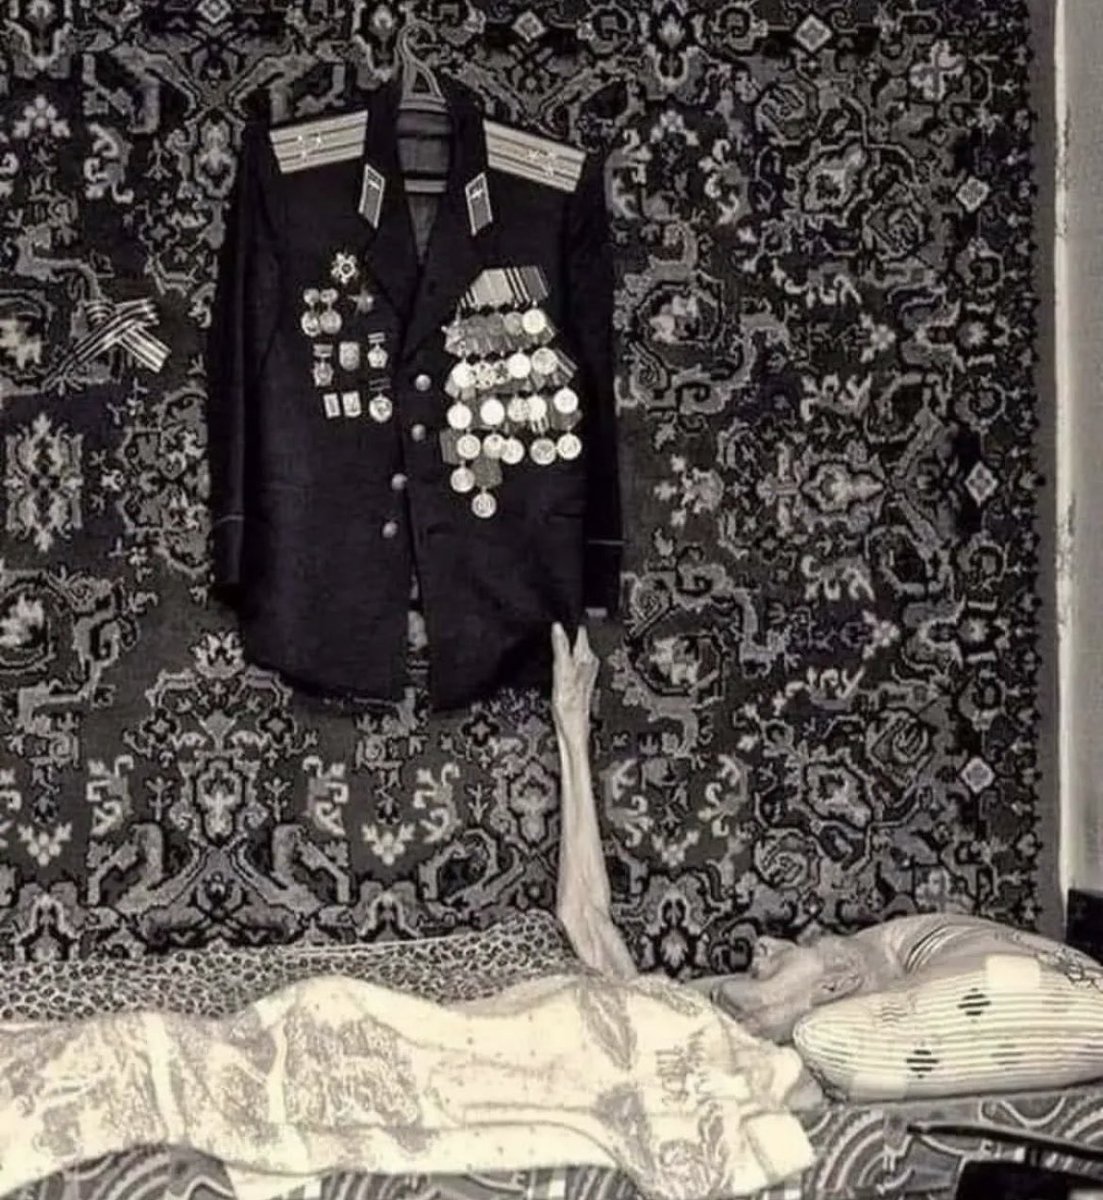 In 2010, a photograph captures the touching image of an elderly Russian man clutching his military uniform on his deathbed. The man seen in the picture is a Soviet soldier and a World War II veteran.

His uniform is adorned with various medals, many of which serve as reminders of…